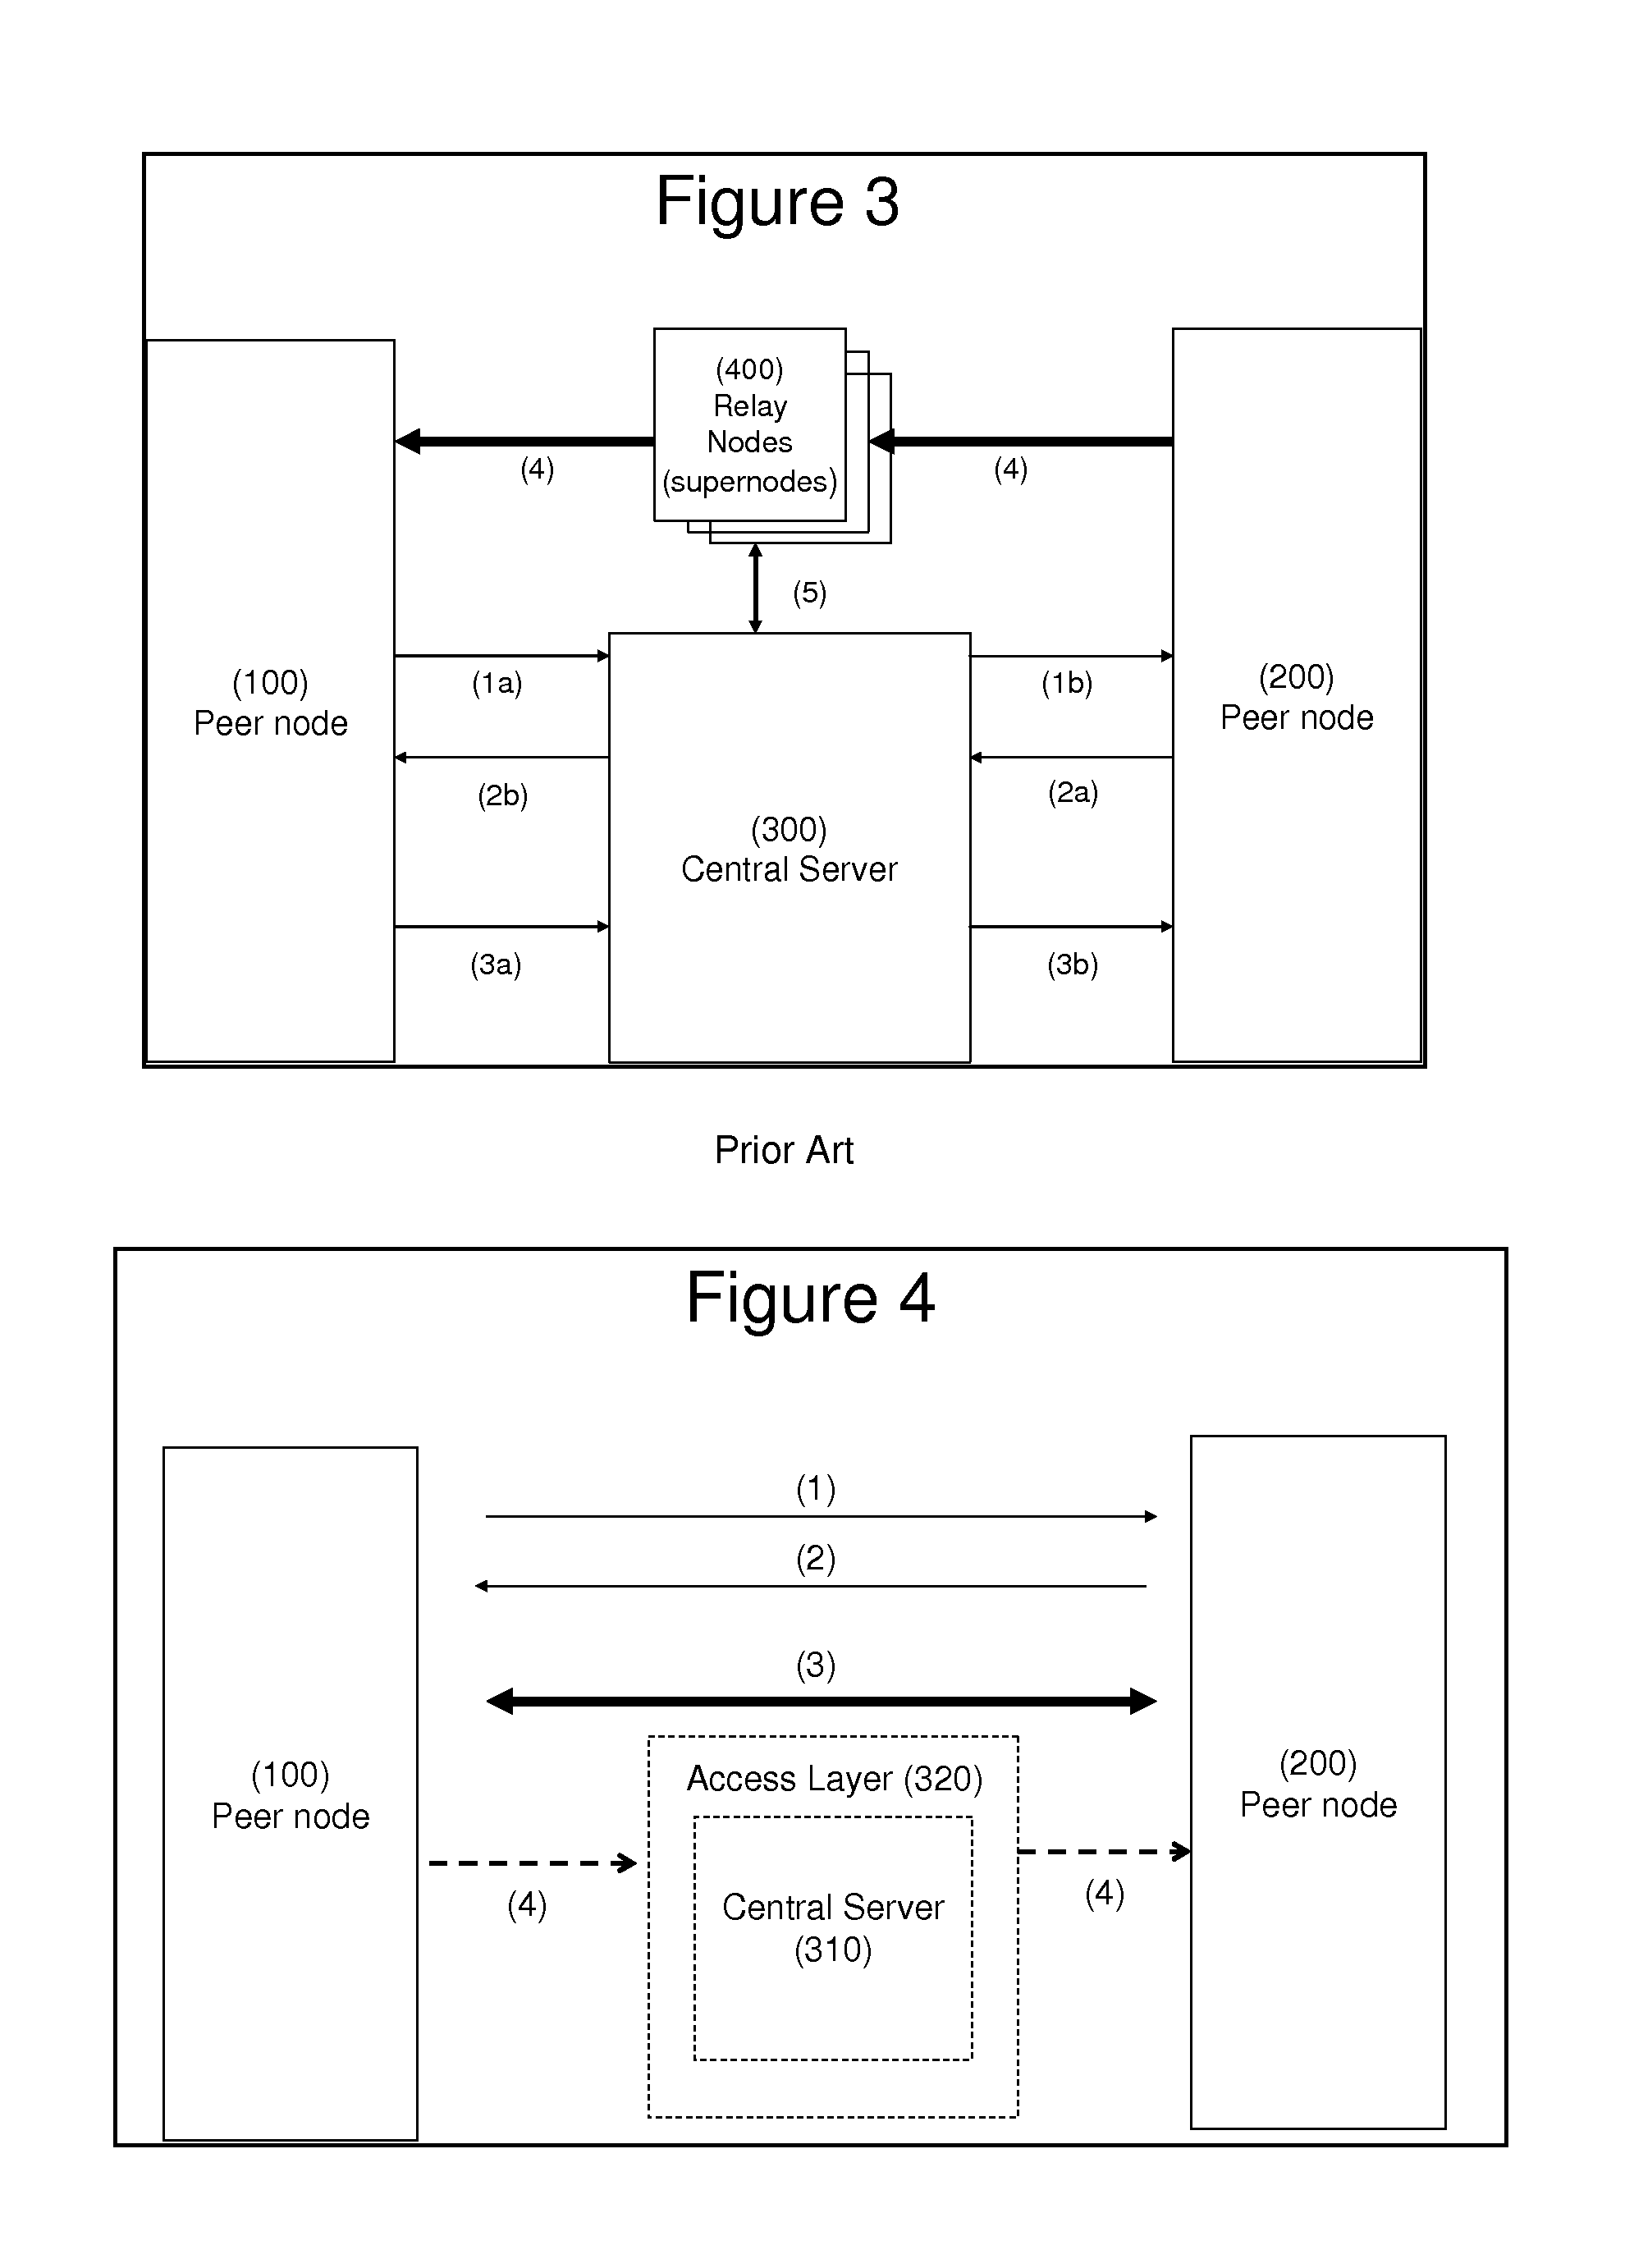 Self-adapting direct peer to peer communication and messaging system